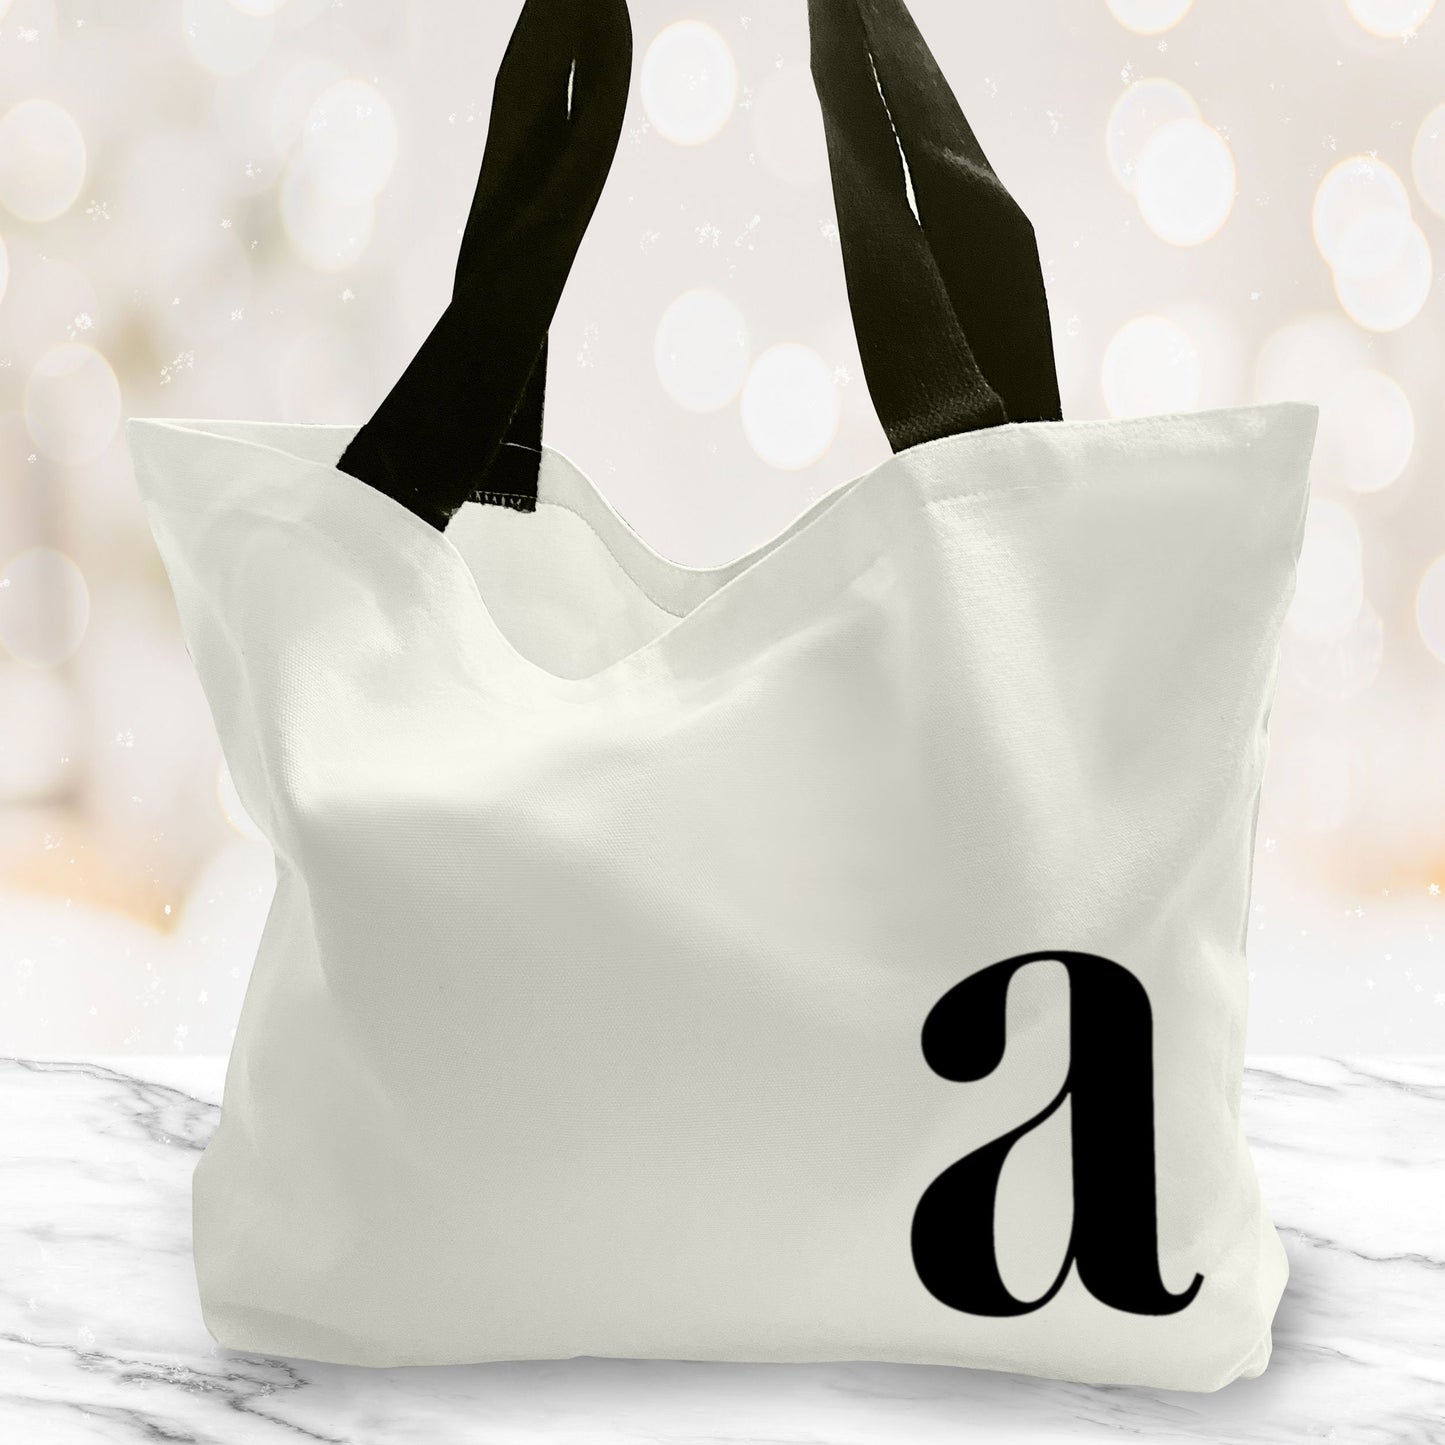 Personalised Initial Large Tote Bag. Large Shopping bag. Birthday Gift. Mother's Day Gift Unique Gift Idea. Cute Tote Bag. Gifts for her.